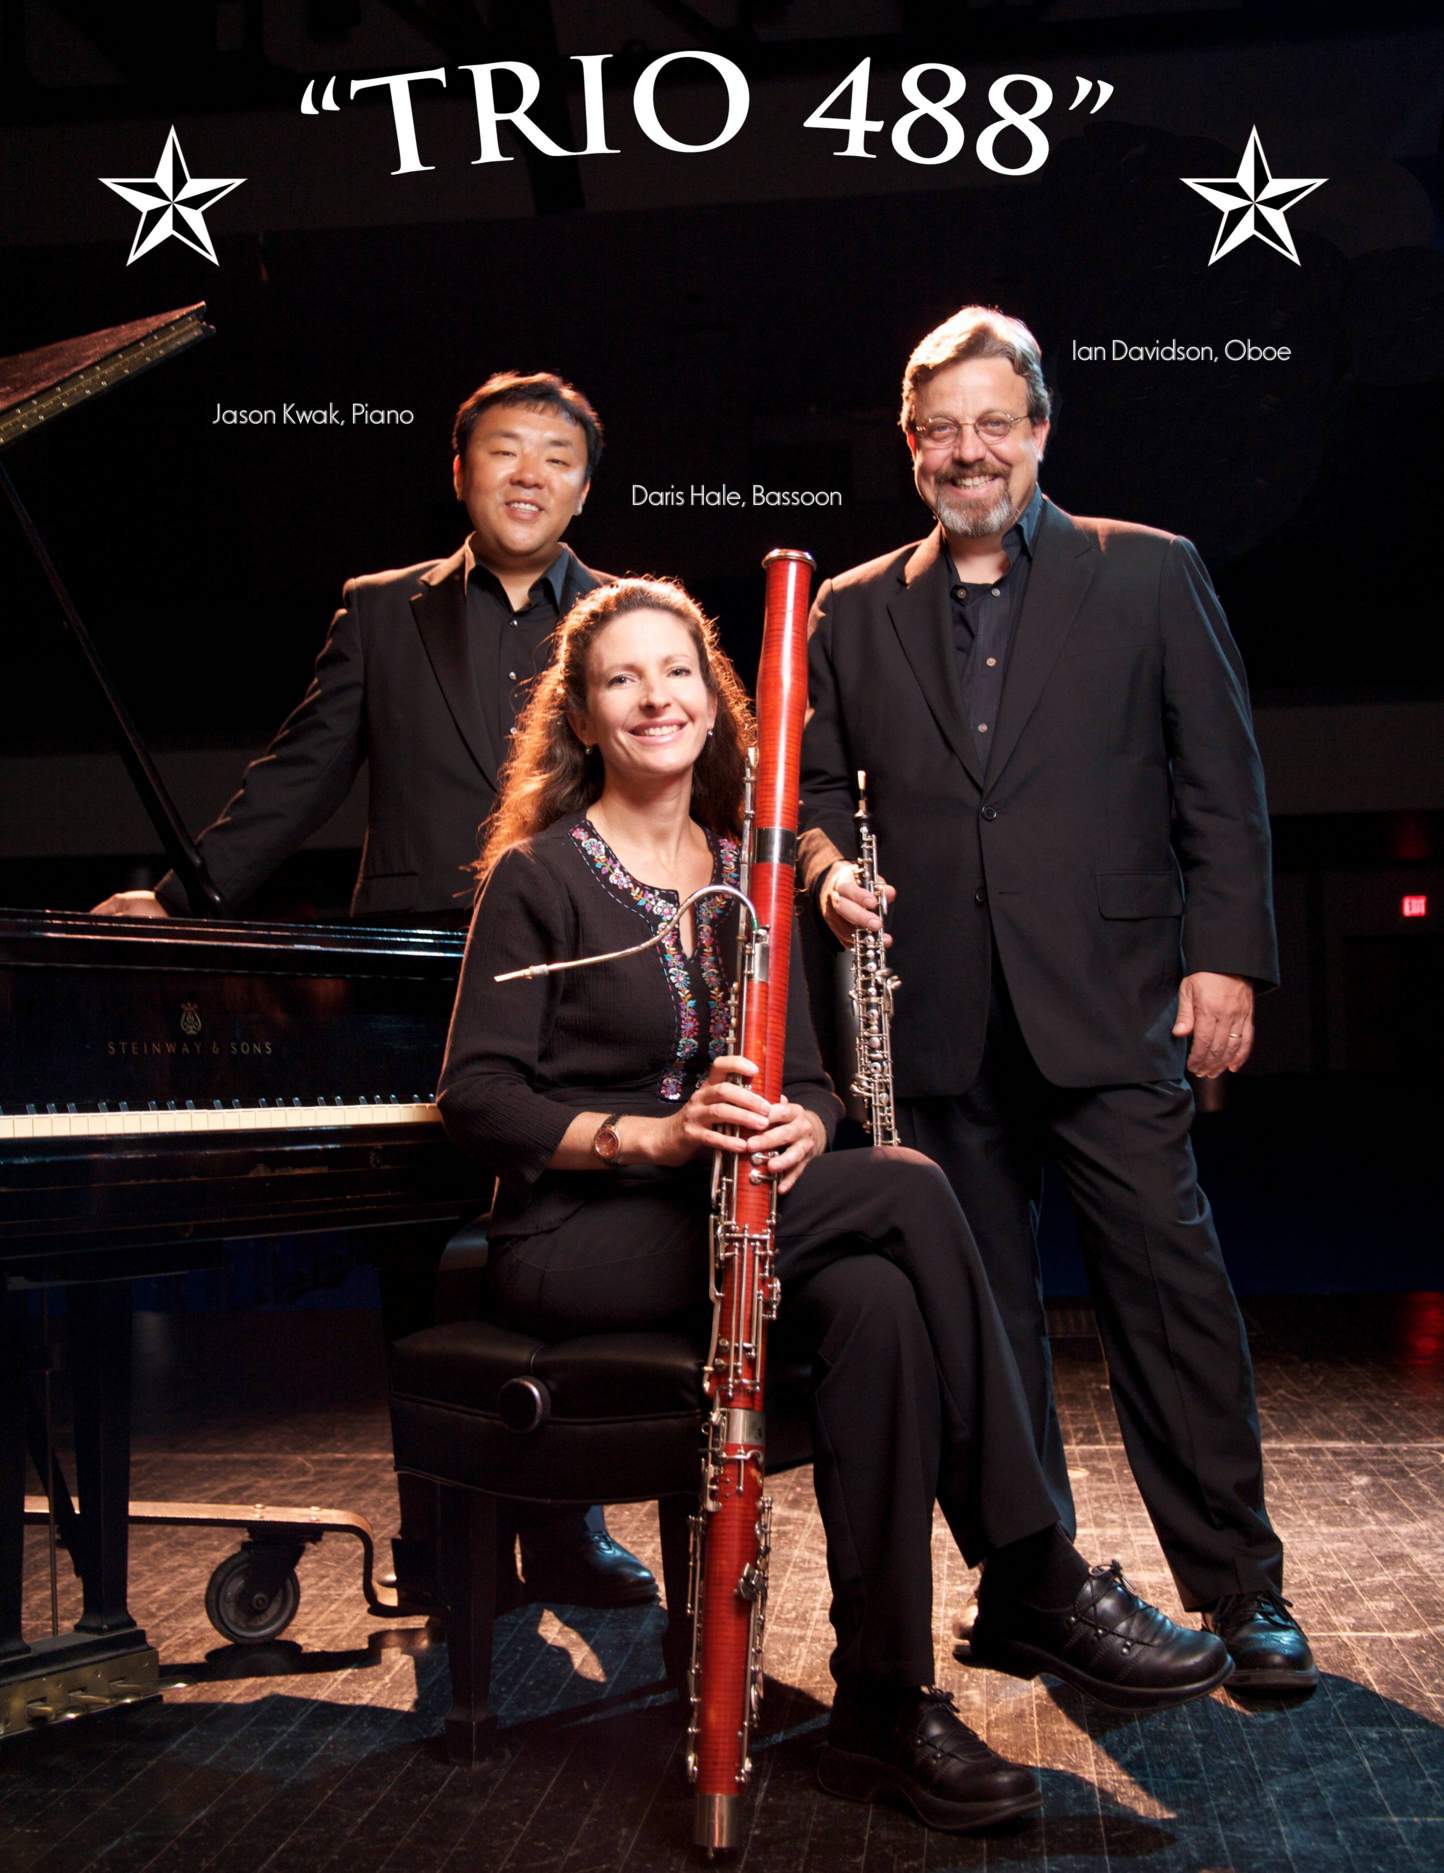 left to right, Jason Kwak next to piano, Daris Hale with bassoon, Ian Davidson with oboe with stage background